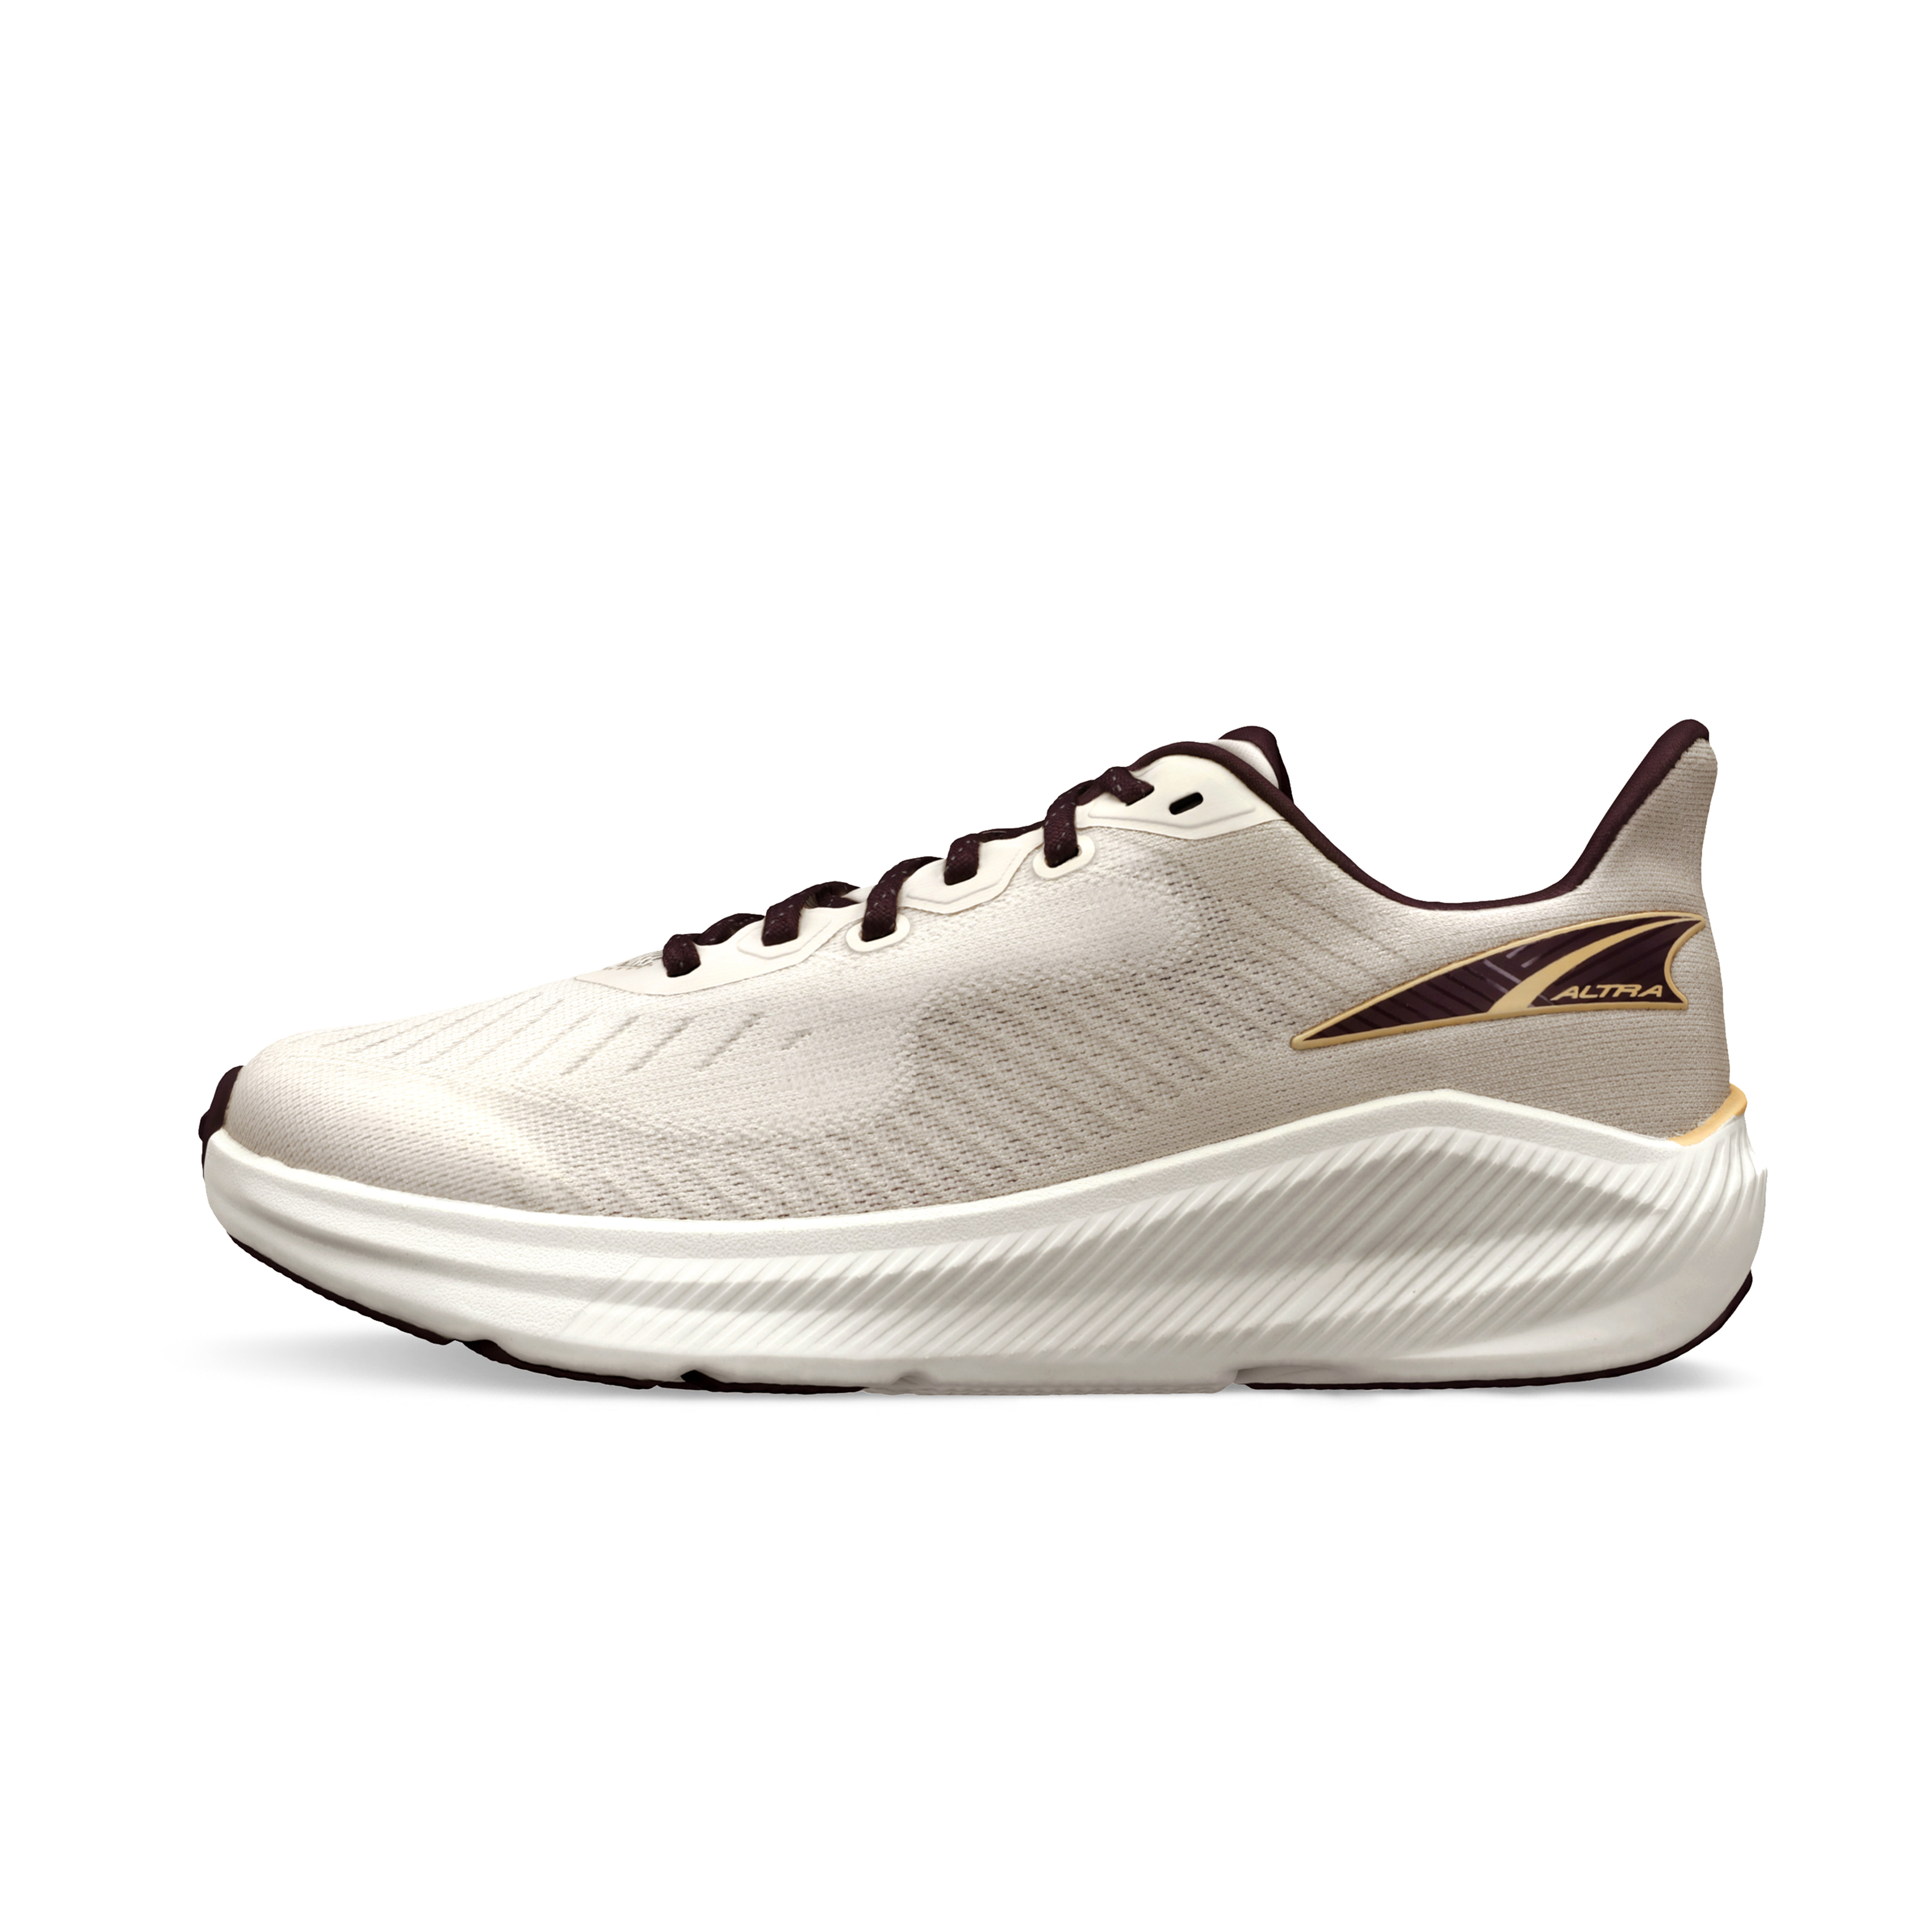 ALTRA WOMEN'S EXPERIENCE FORM - B - 923 TAUPE 